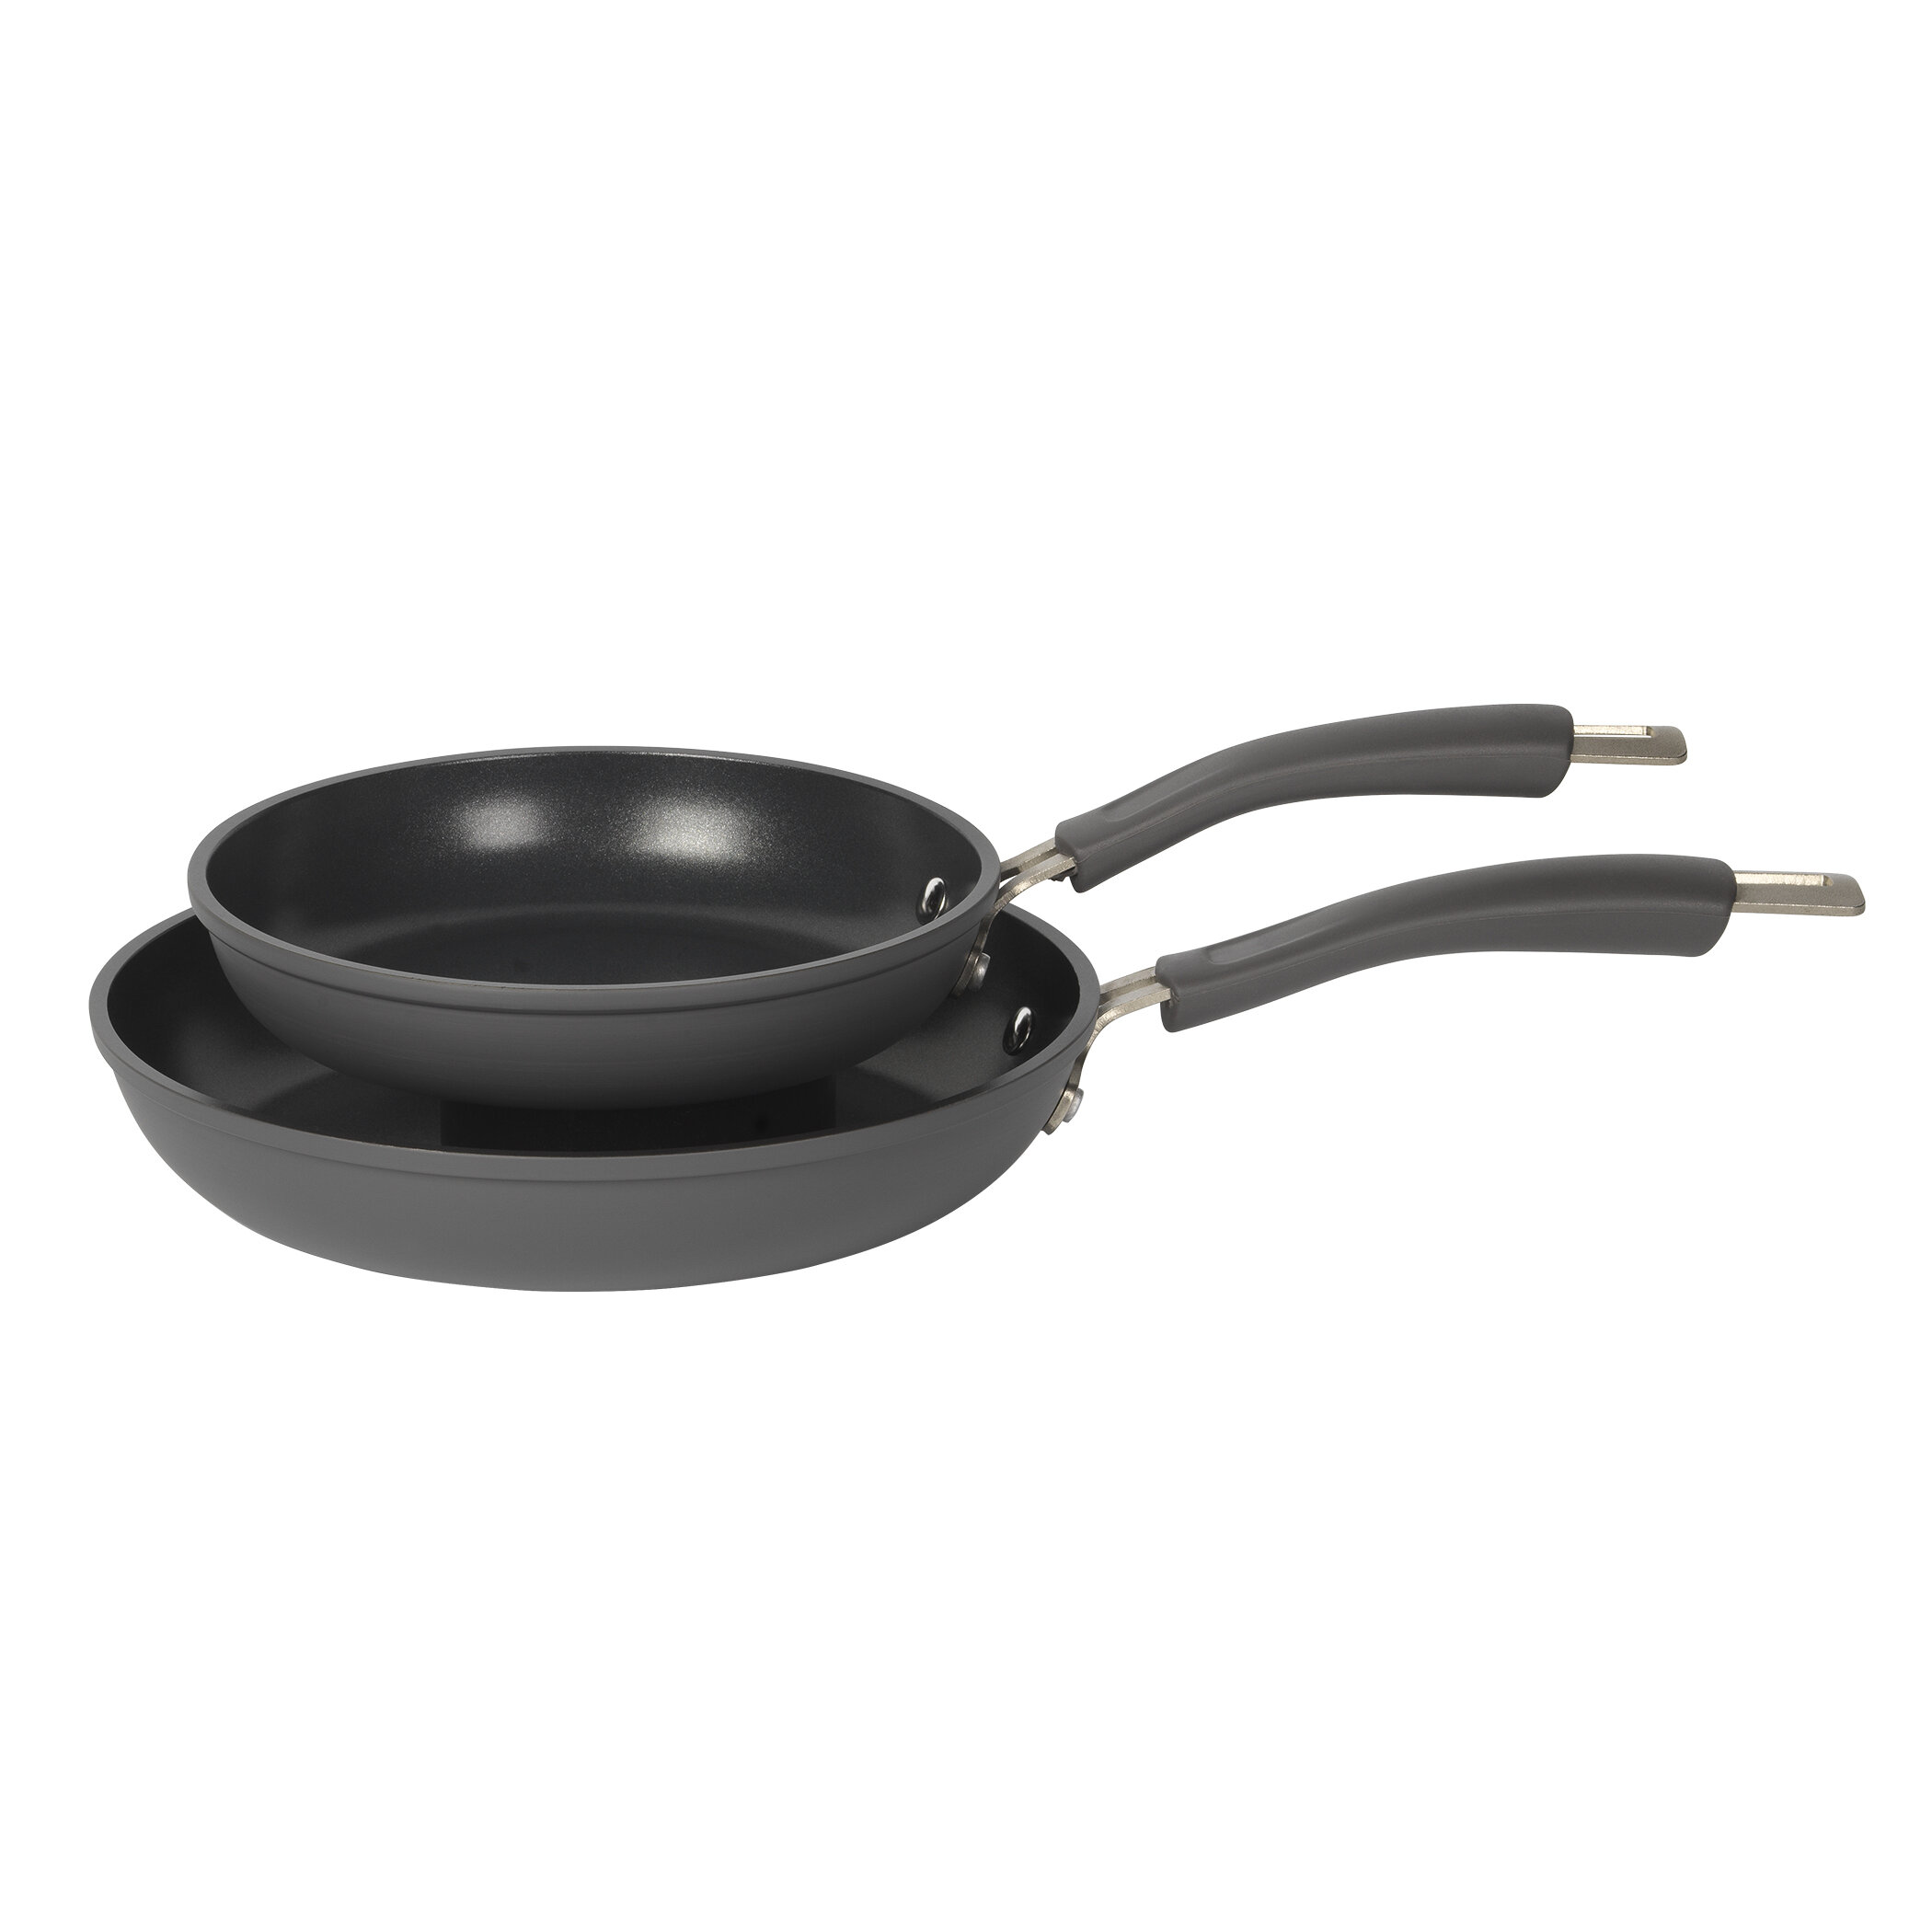 12 inch square frying pan